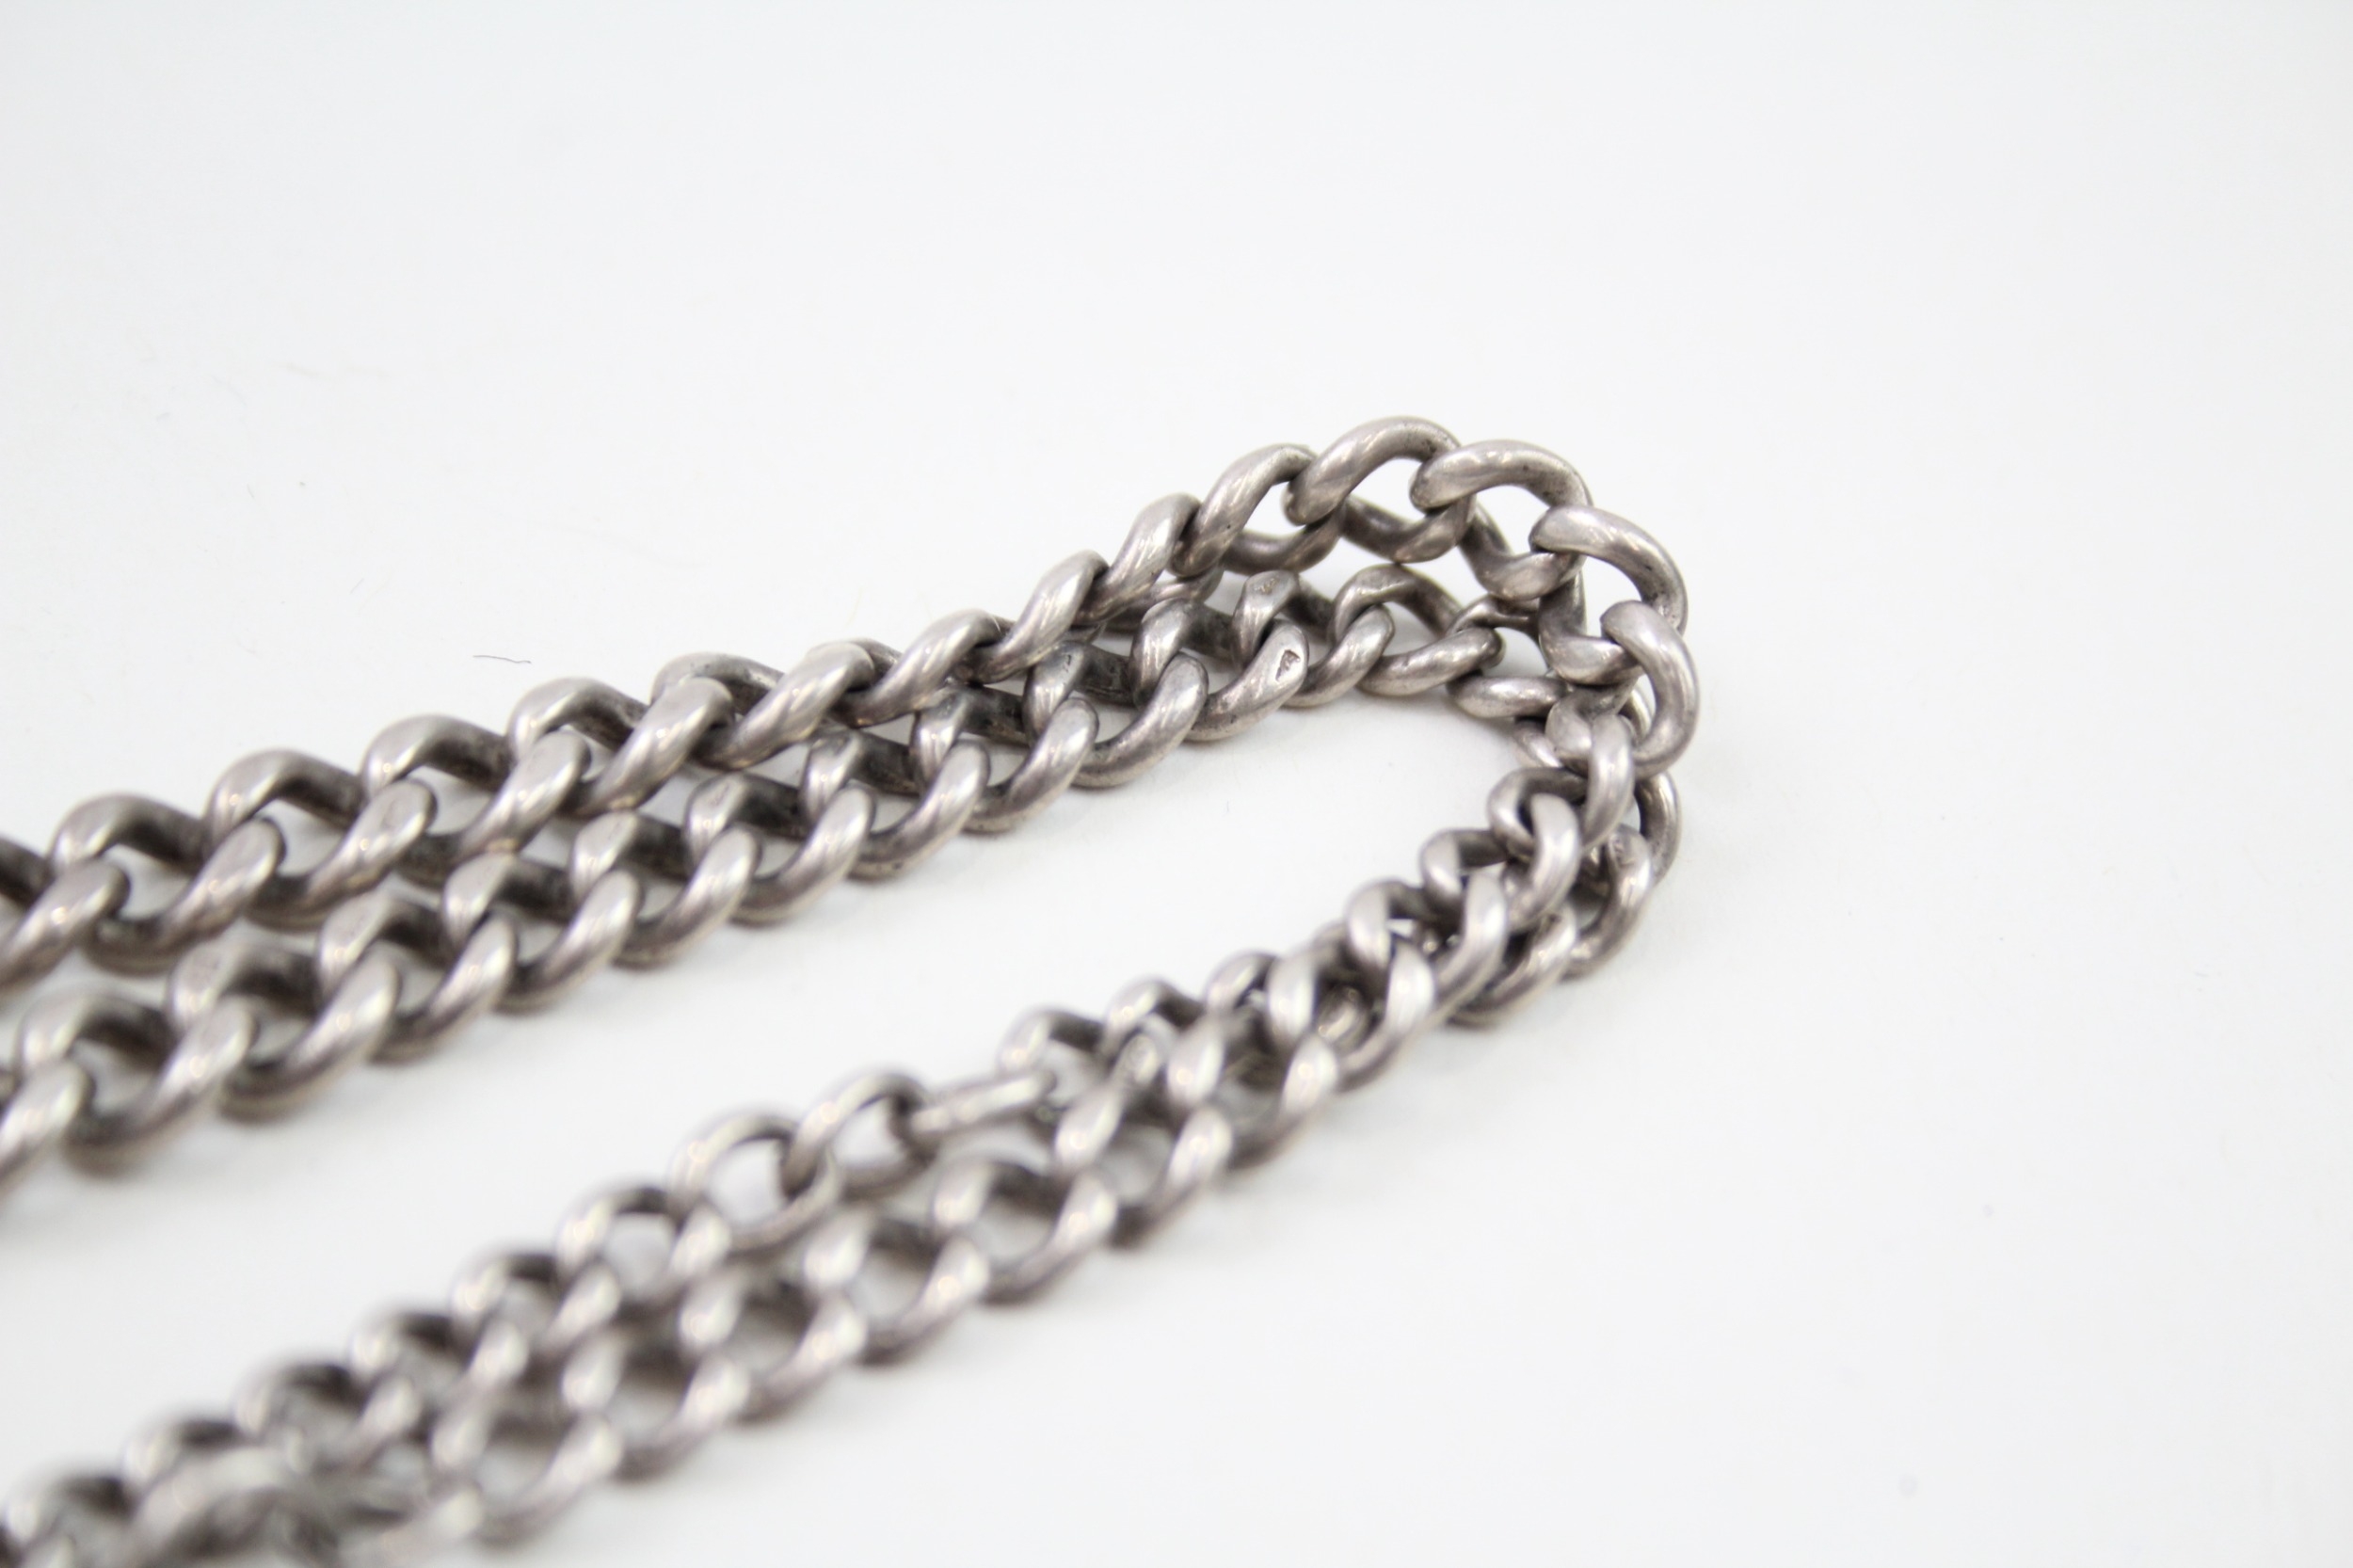 Silver antique watch chain with coin fob (40g) - Image 4 of 6